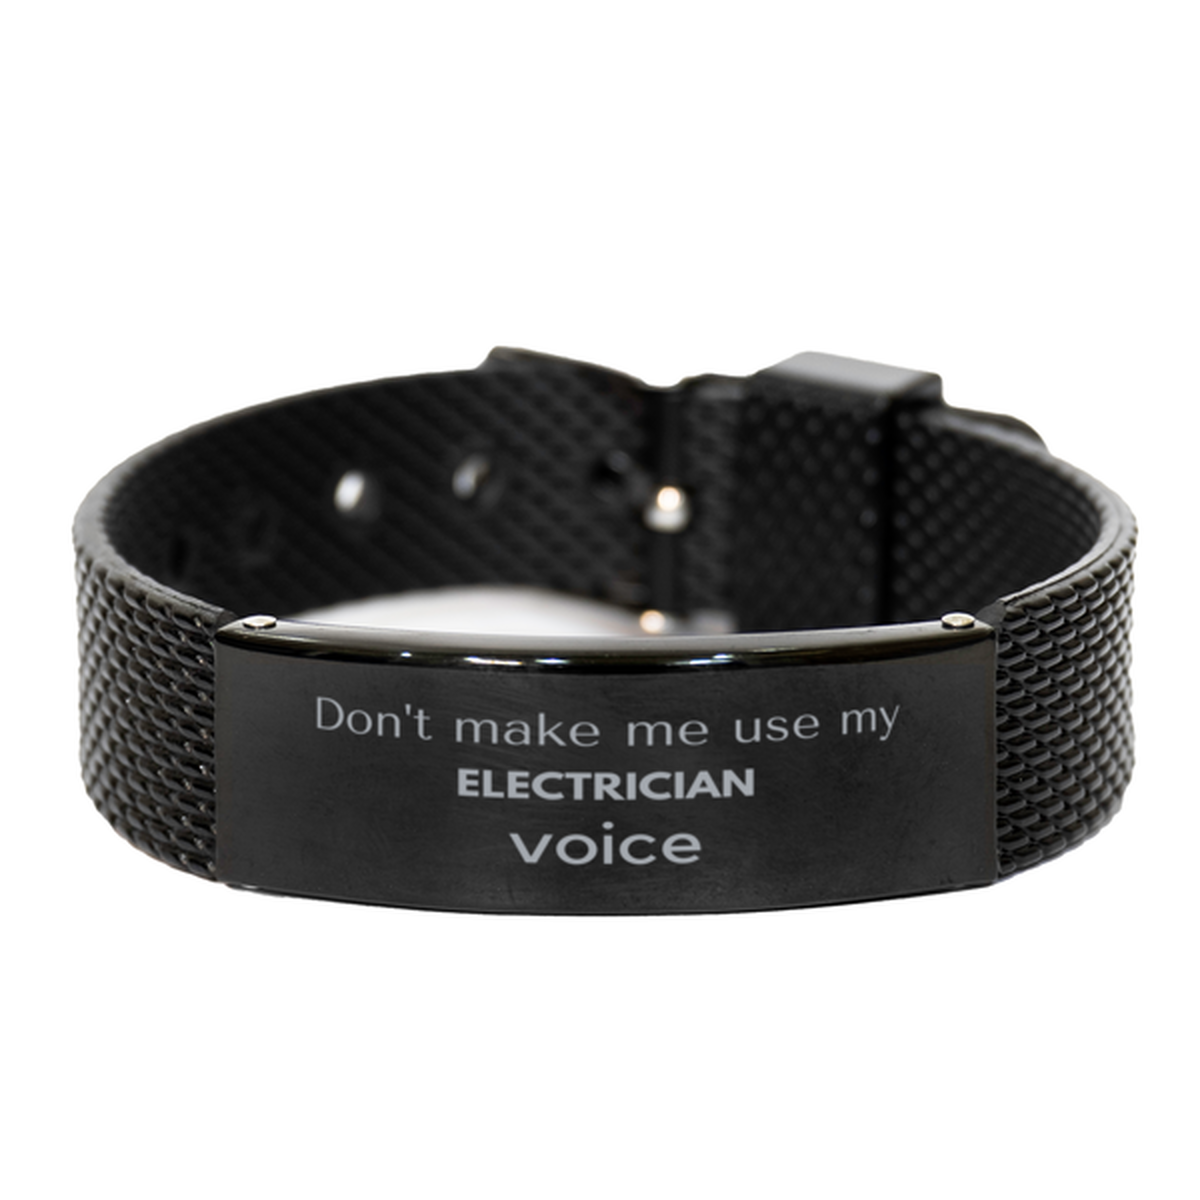 Don't make me use my Electrician voice, Sarcasm Electrician Gifts, Christmas Electrician Black Shark Mesh Bracelet Birthday Unique Gifts For Electrician Coworkers, Men, Women, Colleague, Friends